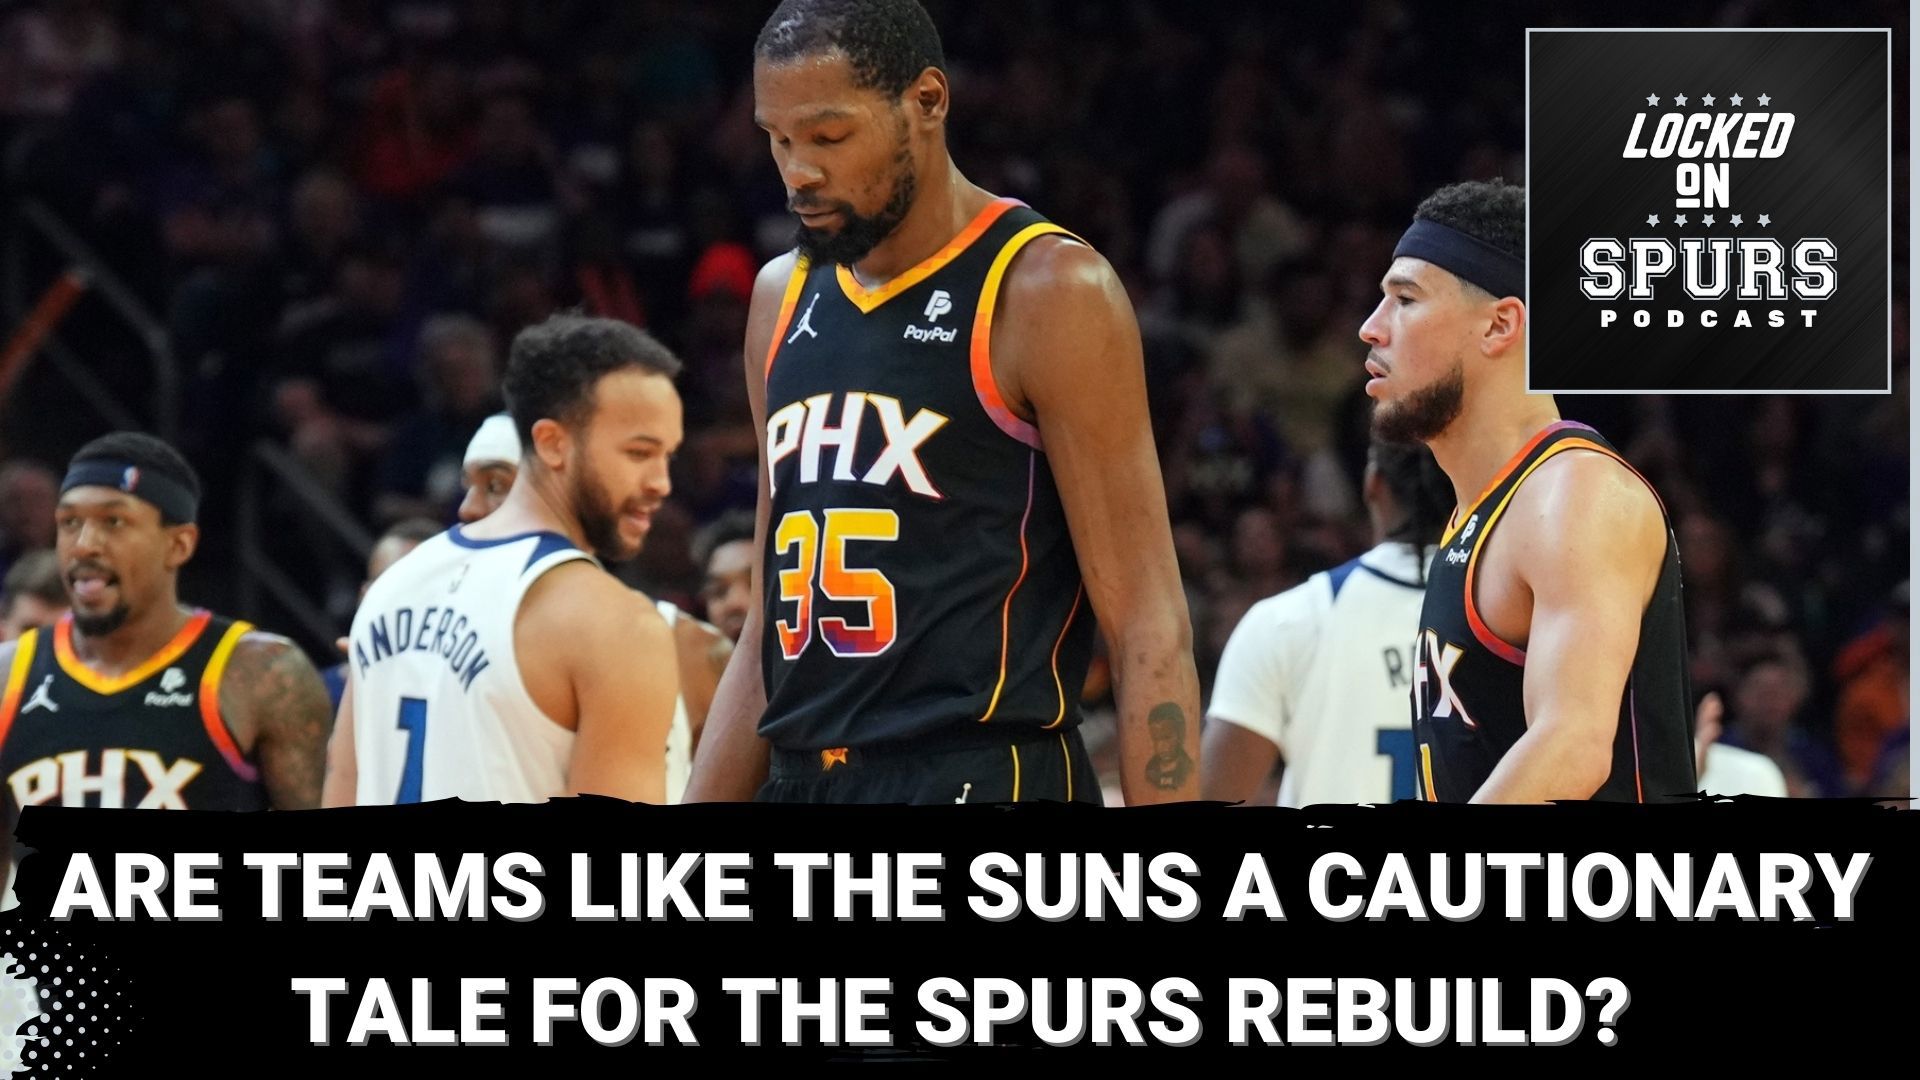 What can the Spurs learn from teams with several All-Star players on the roster?